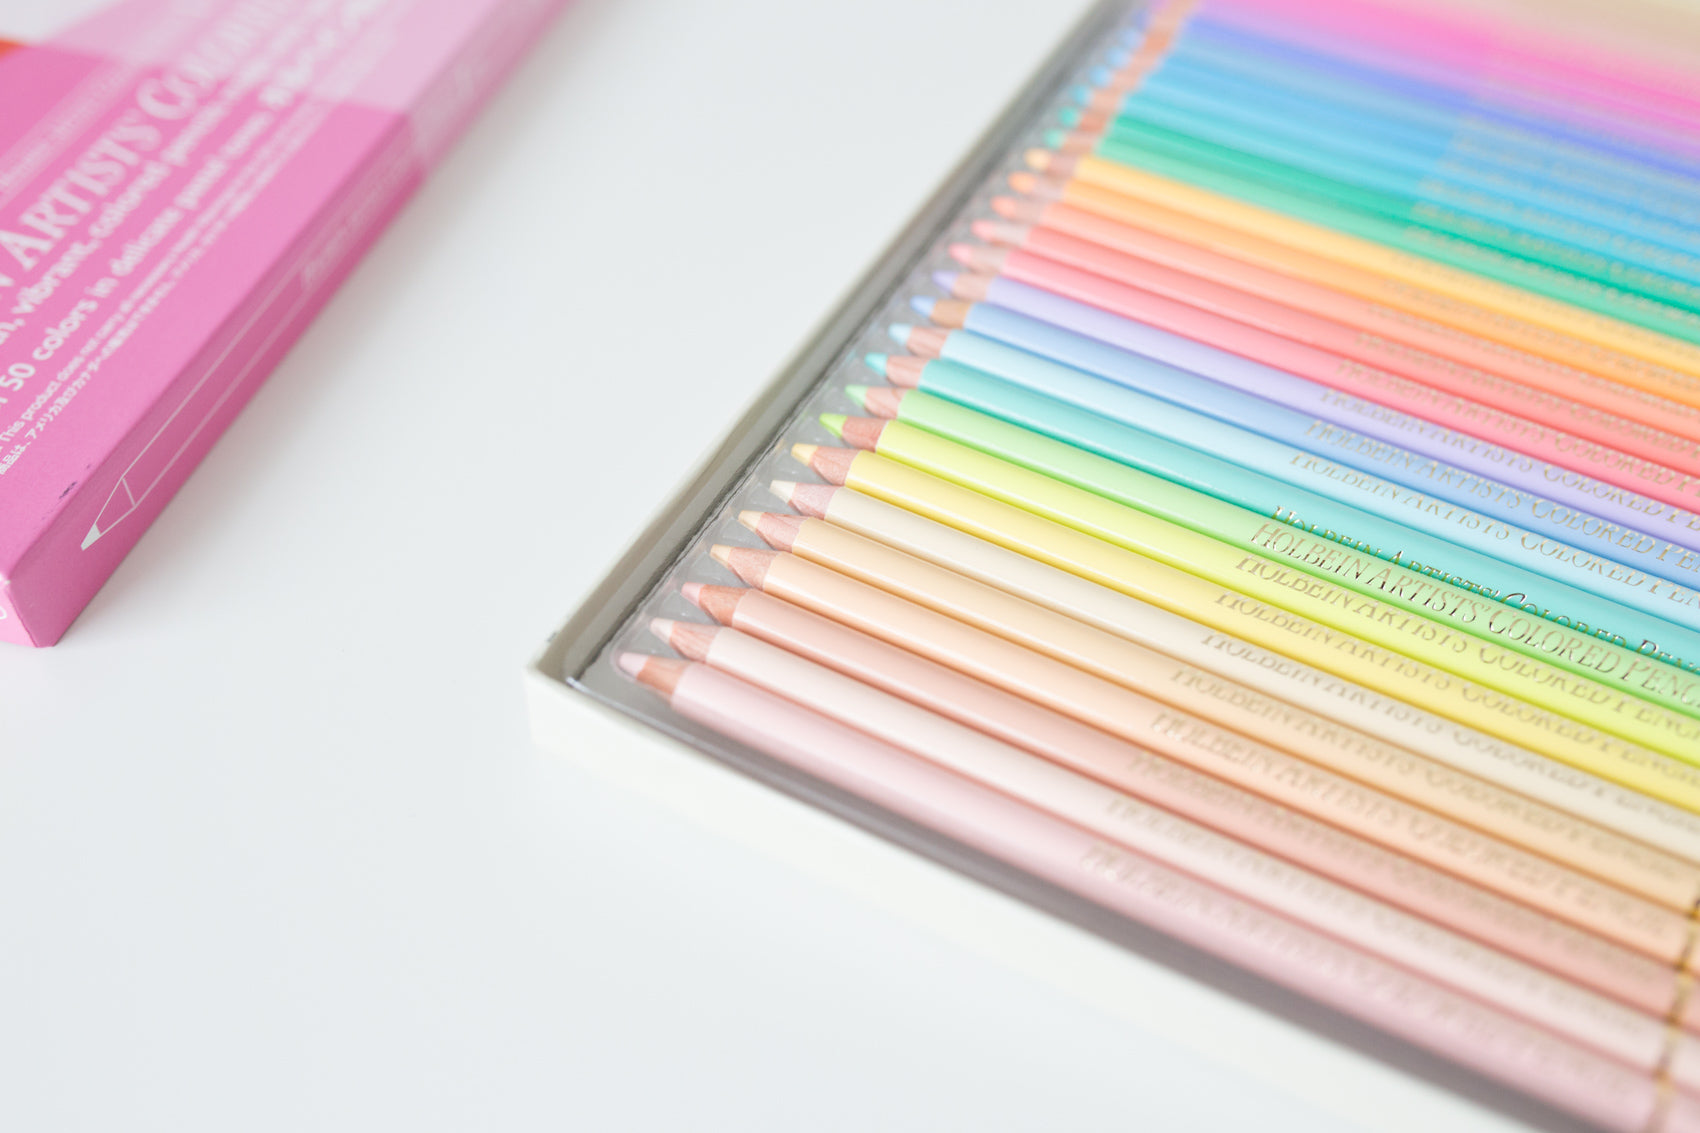  Holbein Coloring Pencils Pastel set 50